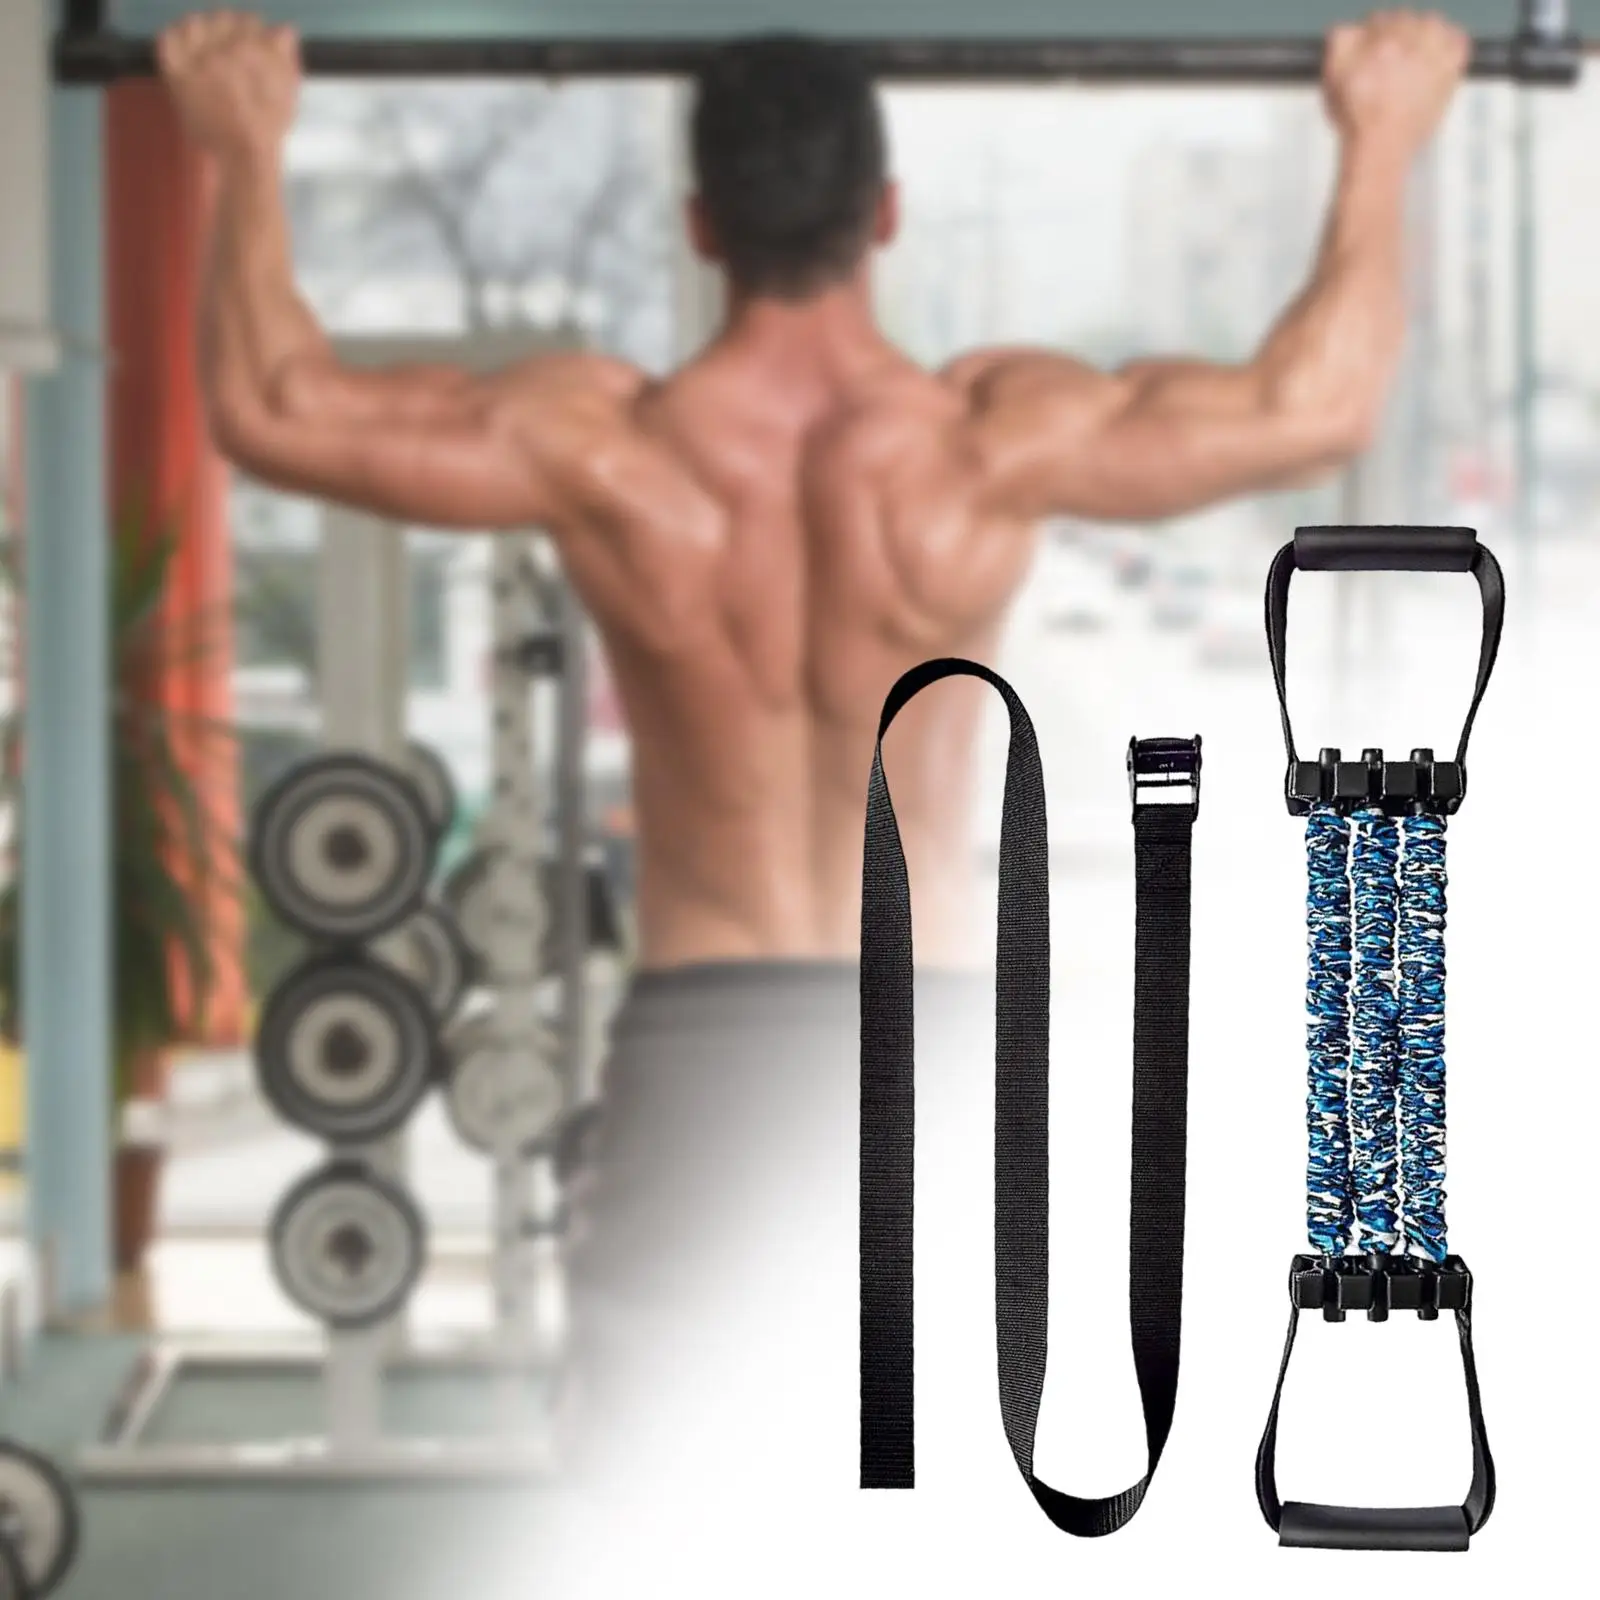 Chin up Assist Band System Chin Up Adjustable for Exercise Training Equipment Improve Arm, Shoulders and Chest Strength